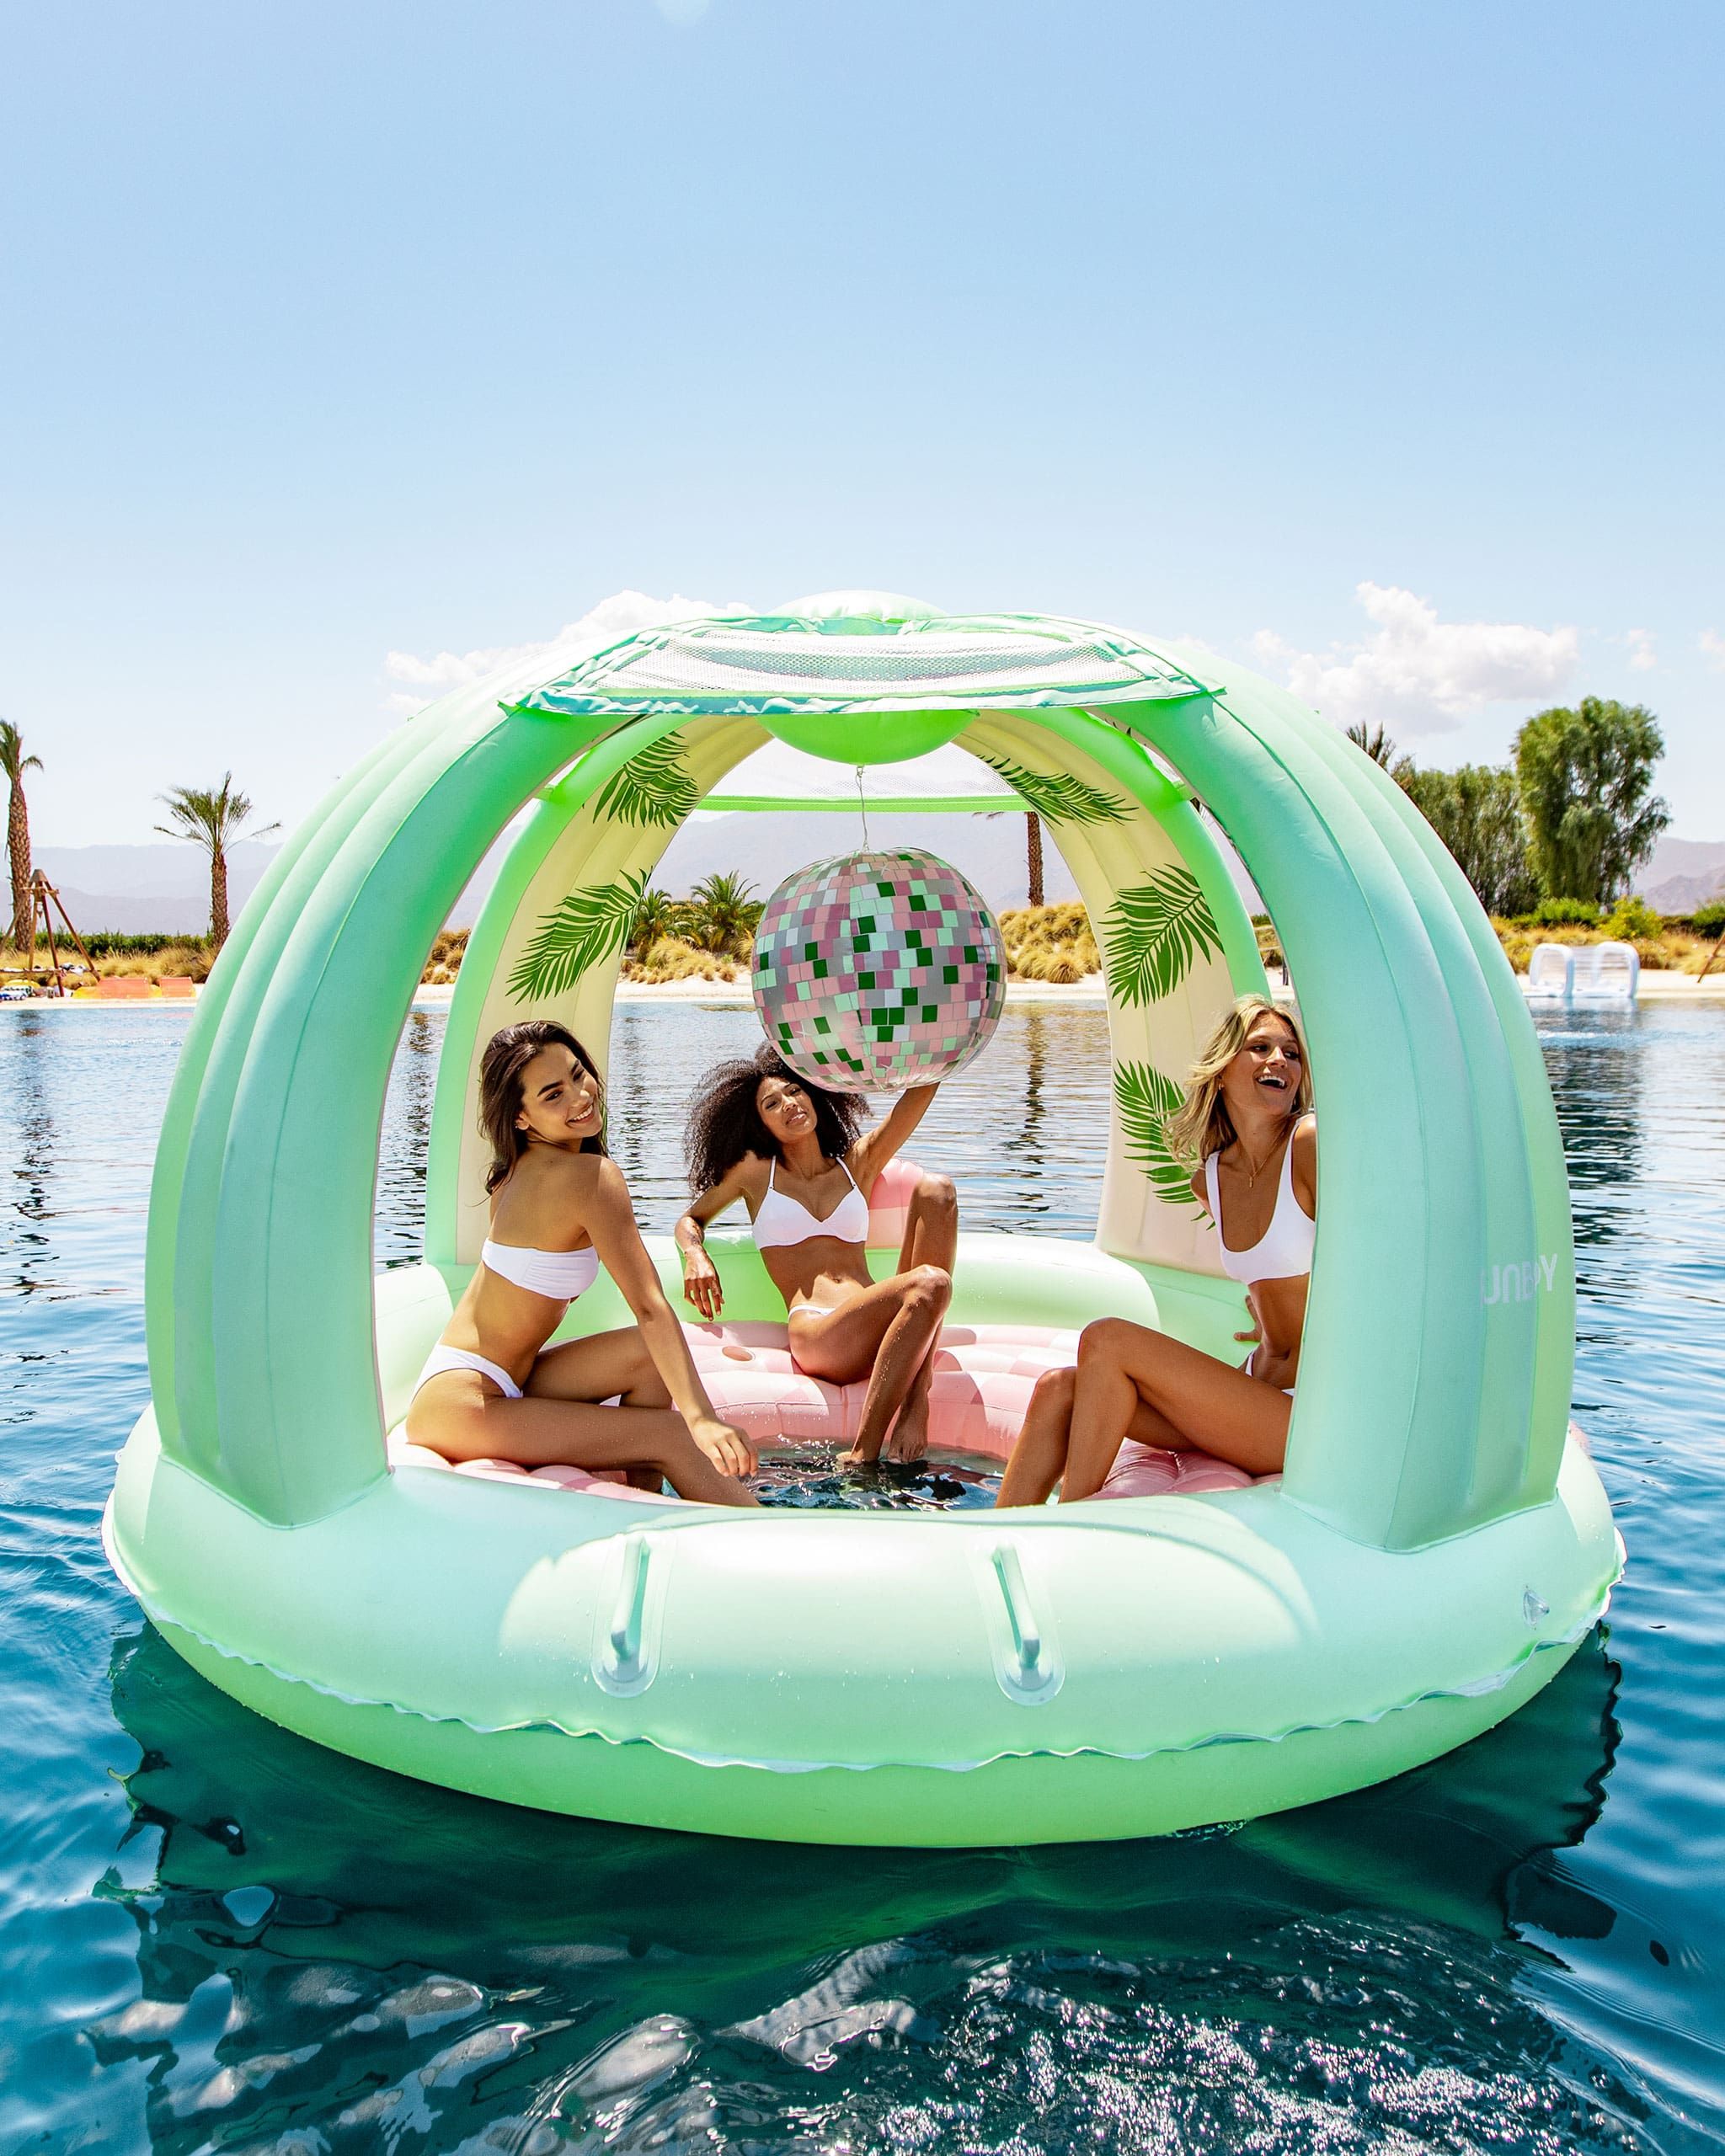 Water Park Outdoor Inflatable Large Pool Lounge Chairs Portable Water Floats Rafts for Swimming Pool Swimming Pool Floaties Pool Raft Lake Floats Pool Floats Adult Beach Lake 